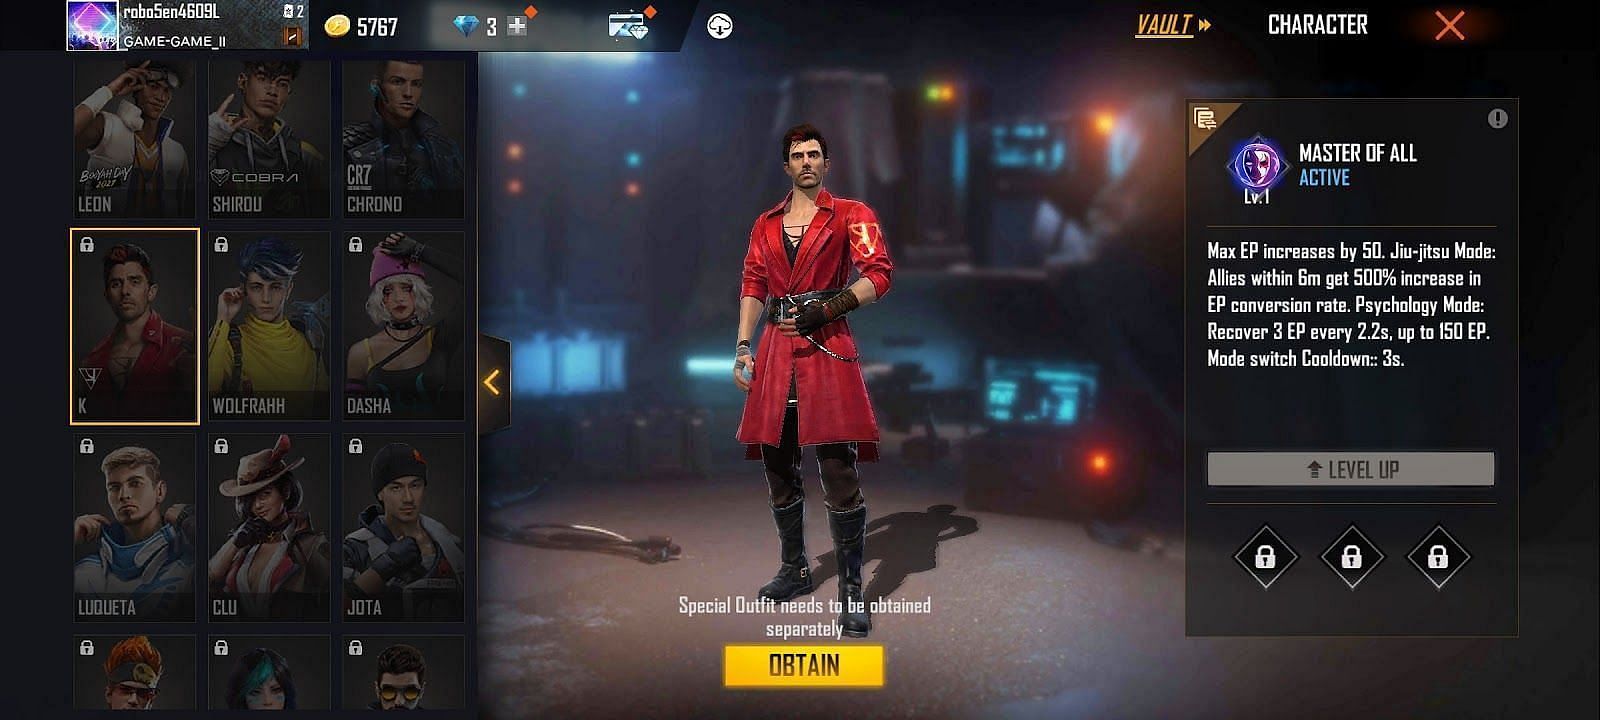 K&#039;s &#039;Master of All&#039; ability (Image via Garena Free Fire)